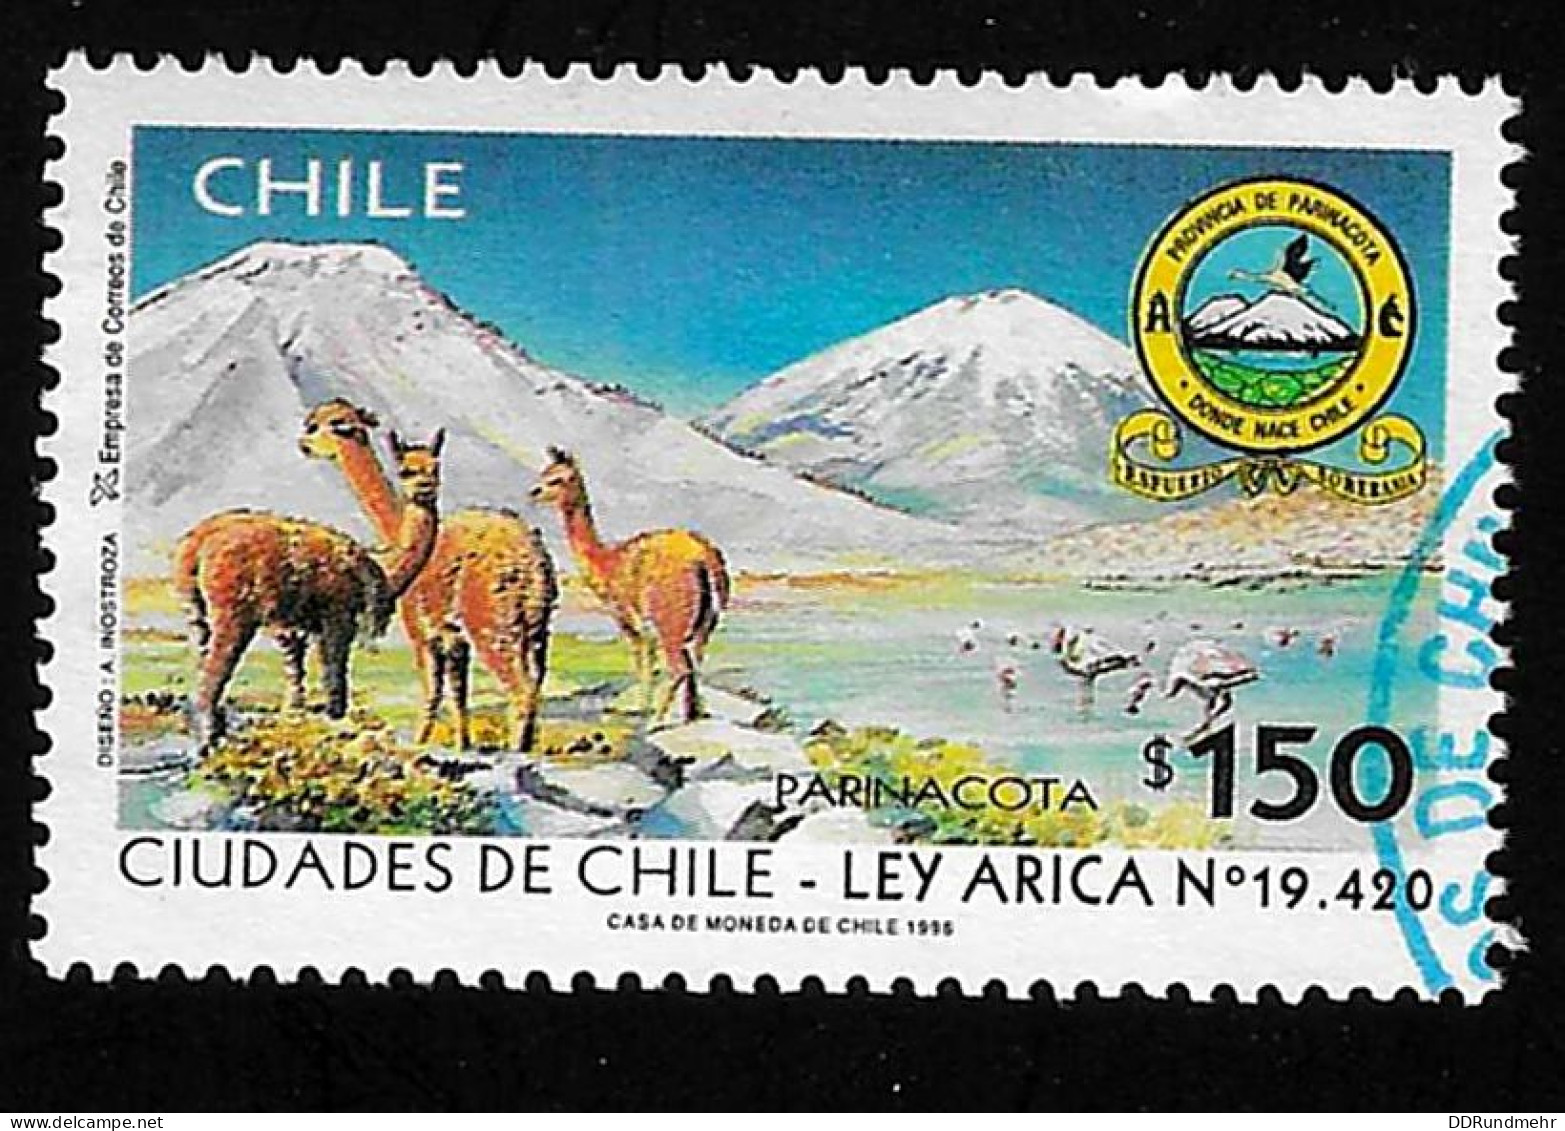 1996 Guanaco Michel CL 1803 Stamp Number CL 1191 Yvert Et Tellier CL 1405 Stanley Gibbons CL 1760 Used - Chili